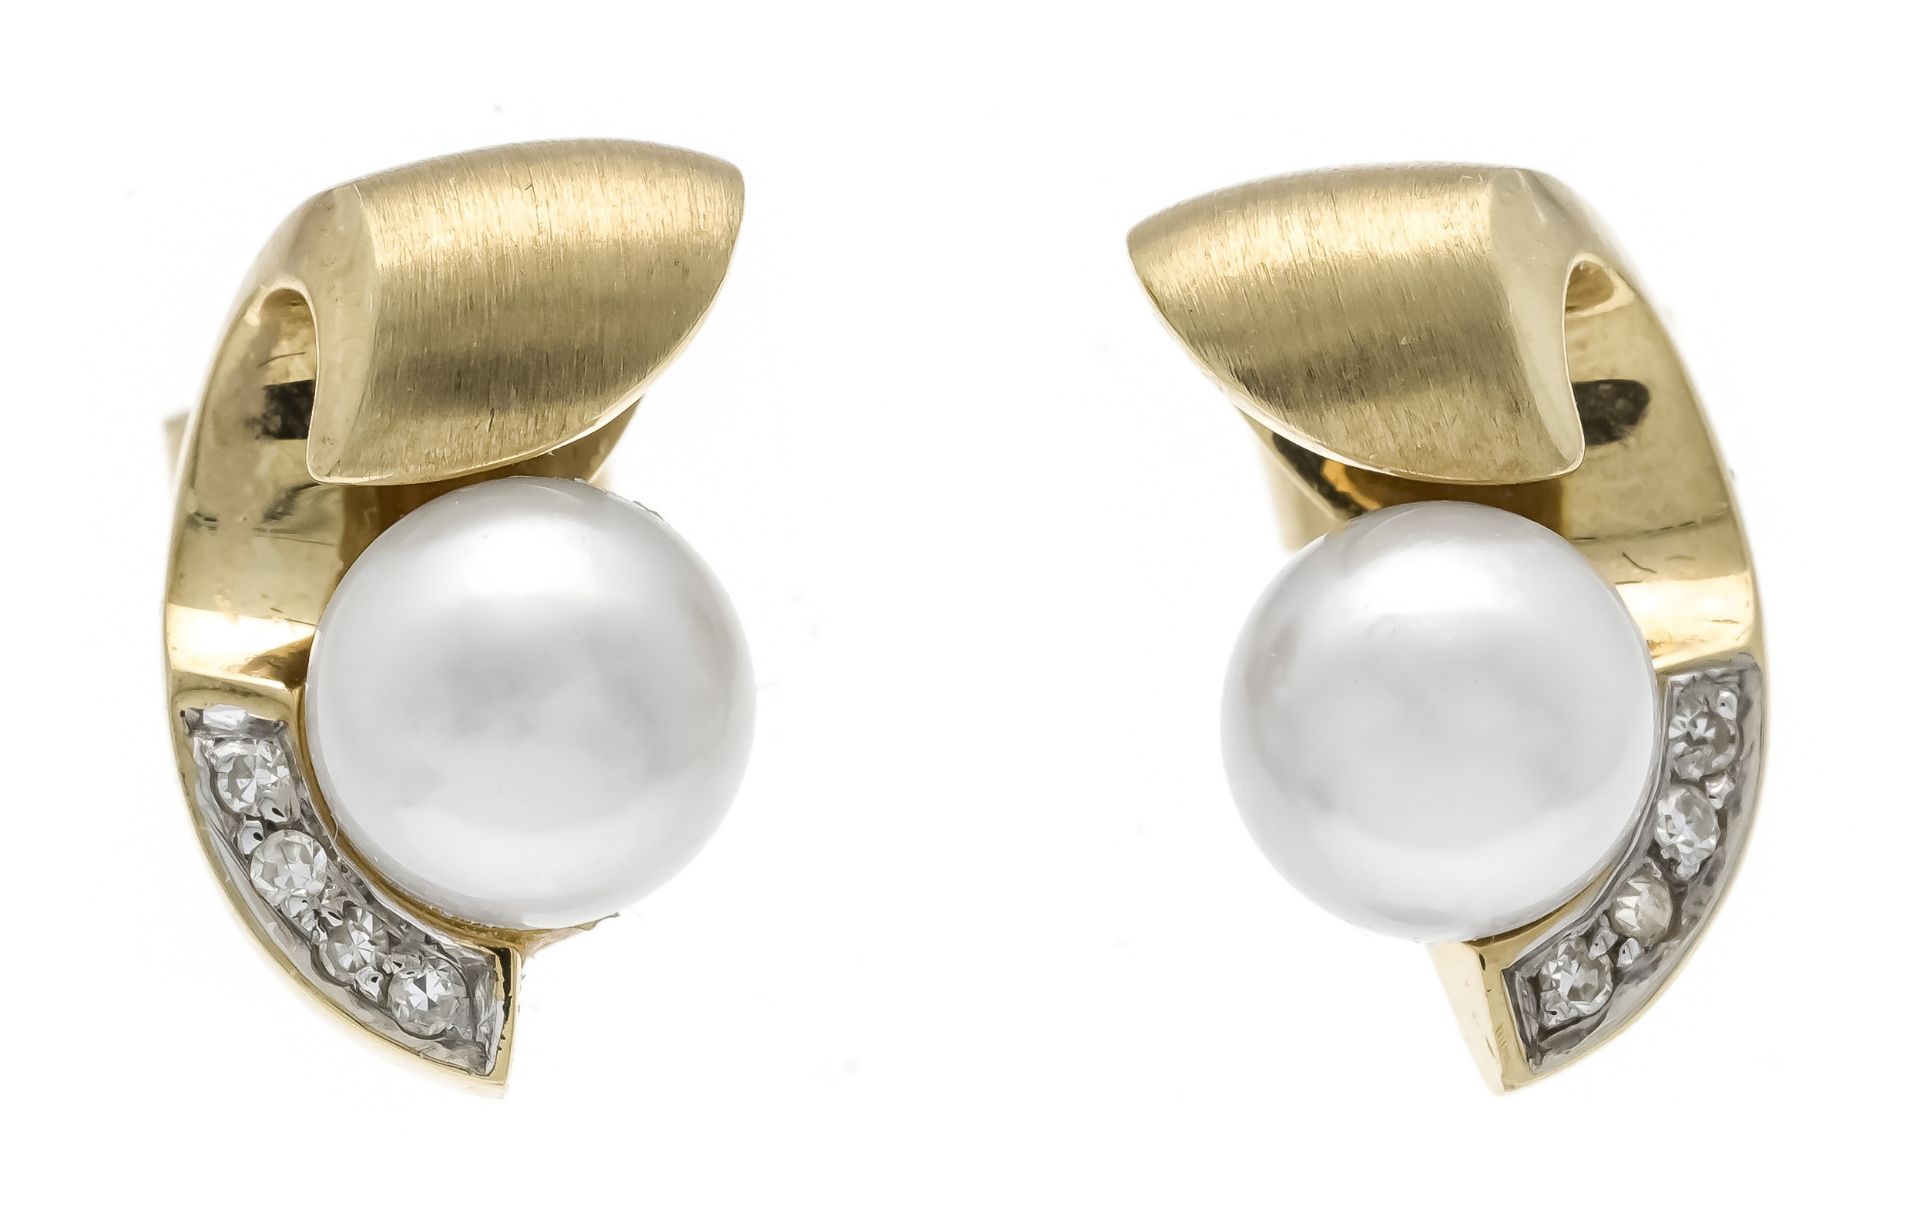 Akoya ear studs GG/WG 585/000 matted, with 2 creamy white Akoya pearls 6.3 mm and 8 octagonal